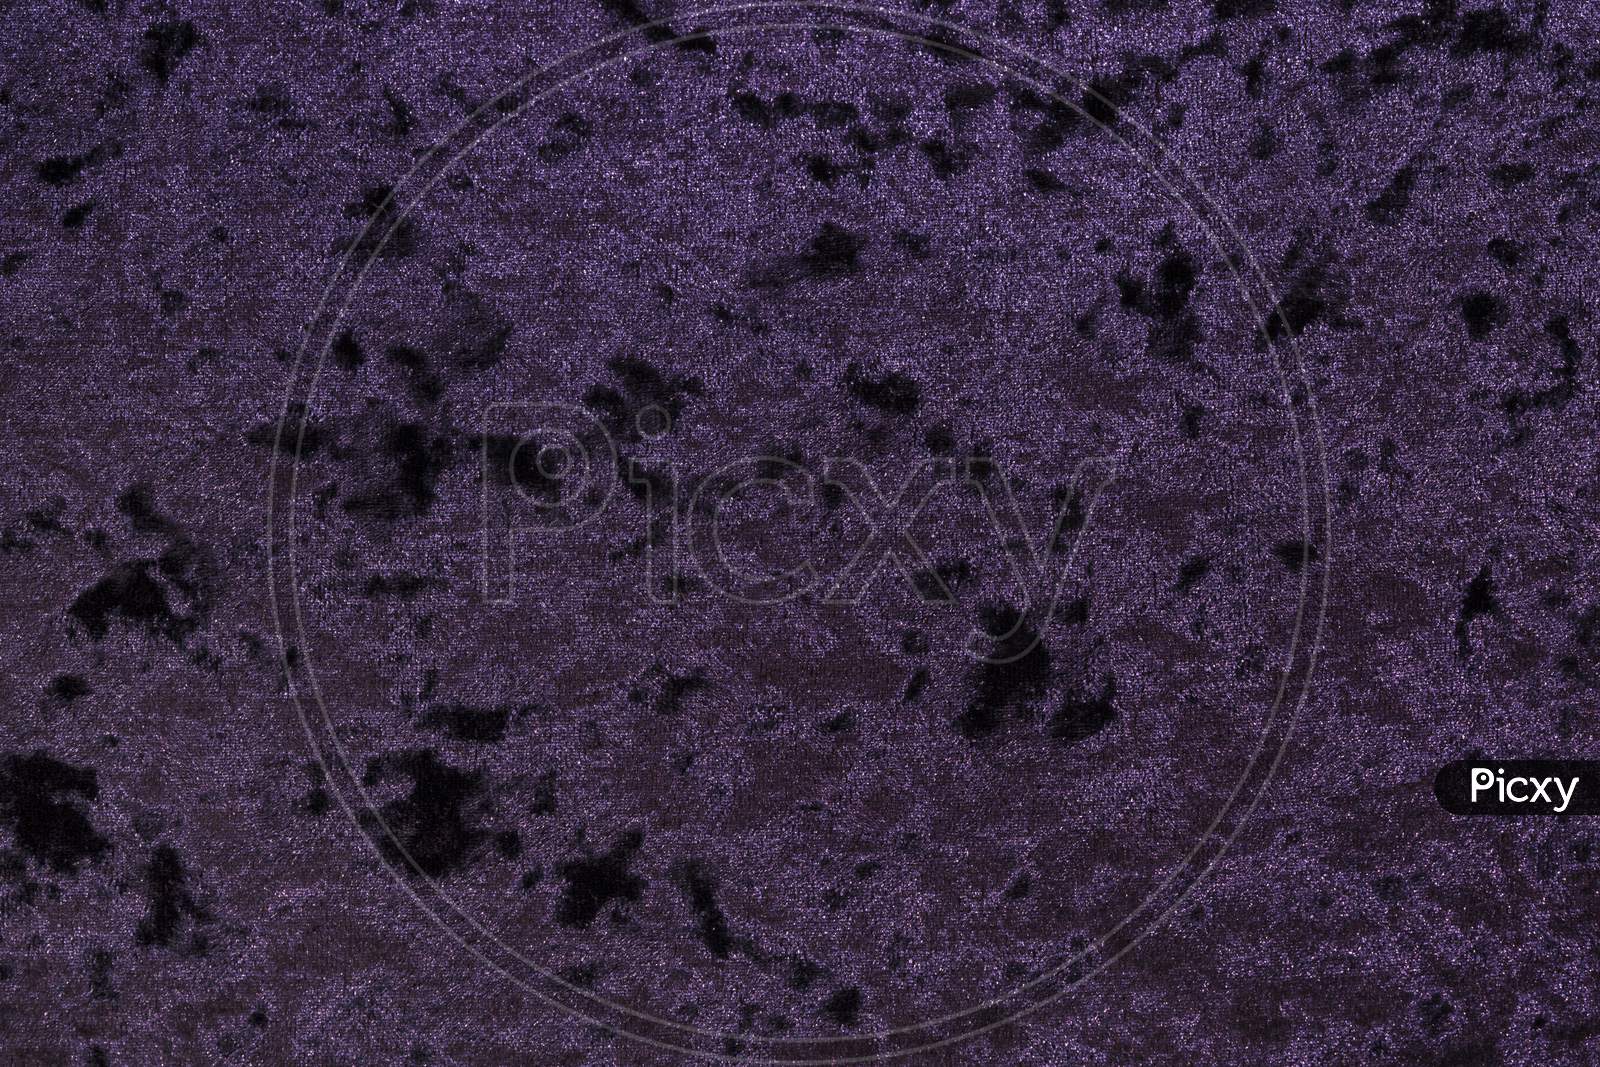 Highly Detailed Texture Of Purple Velour Cloth.